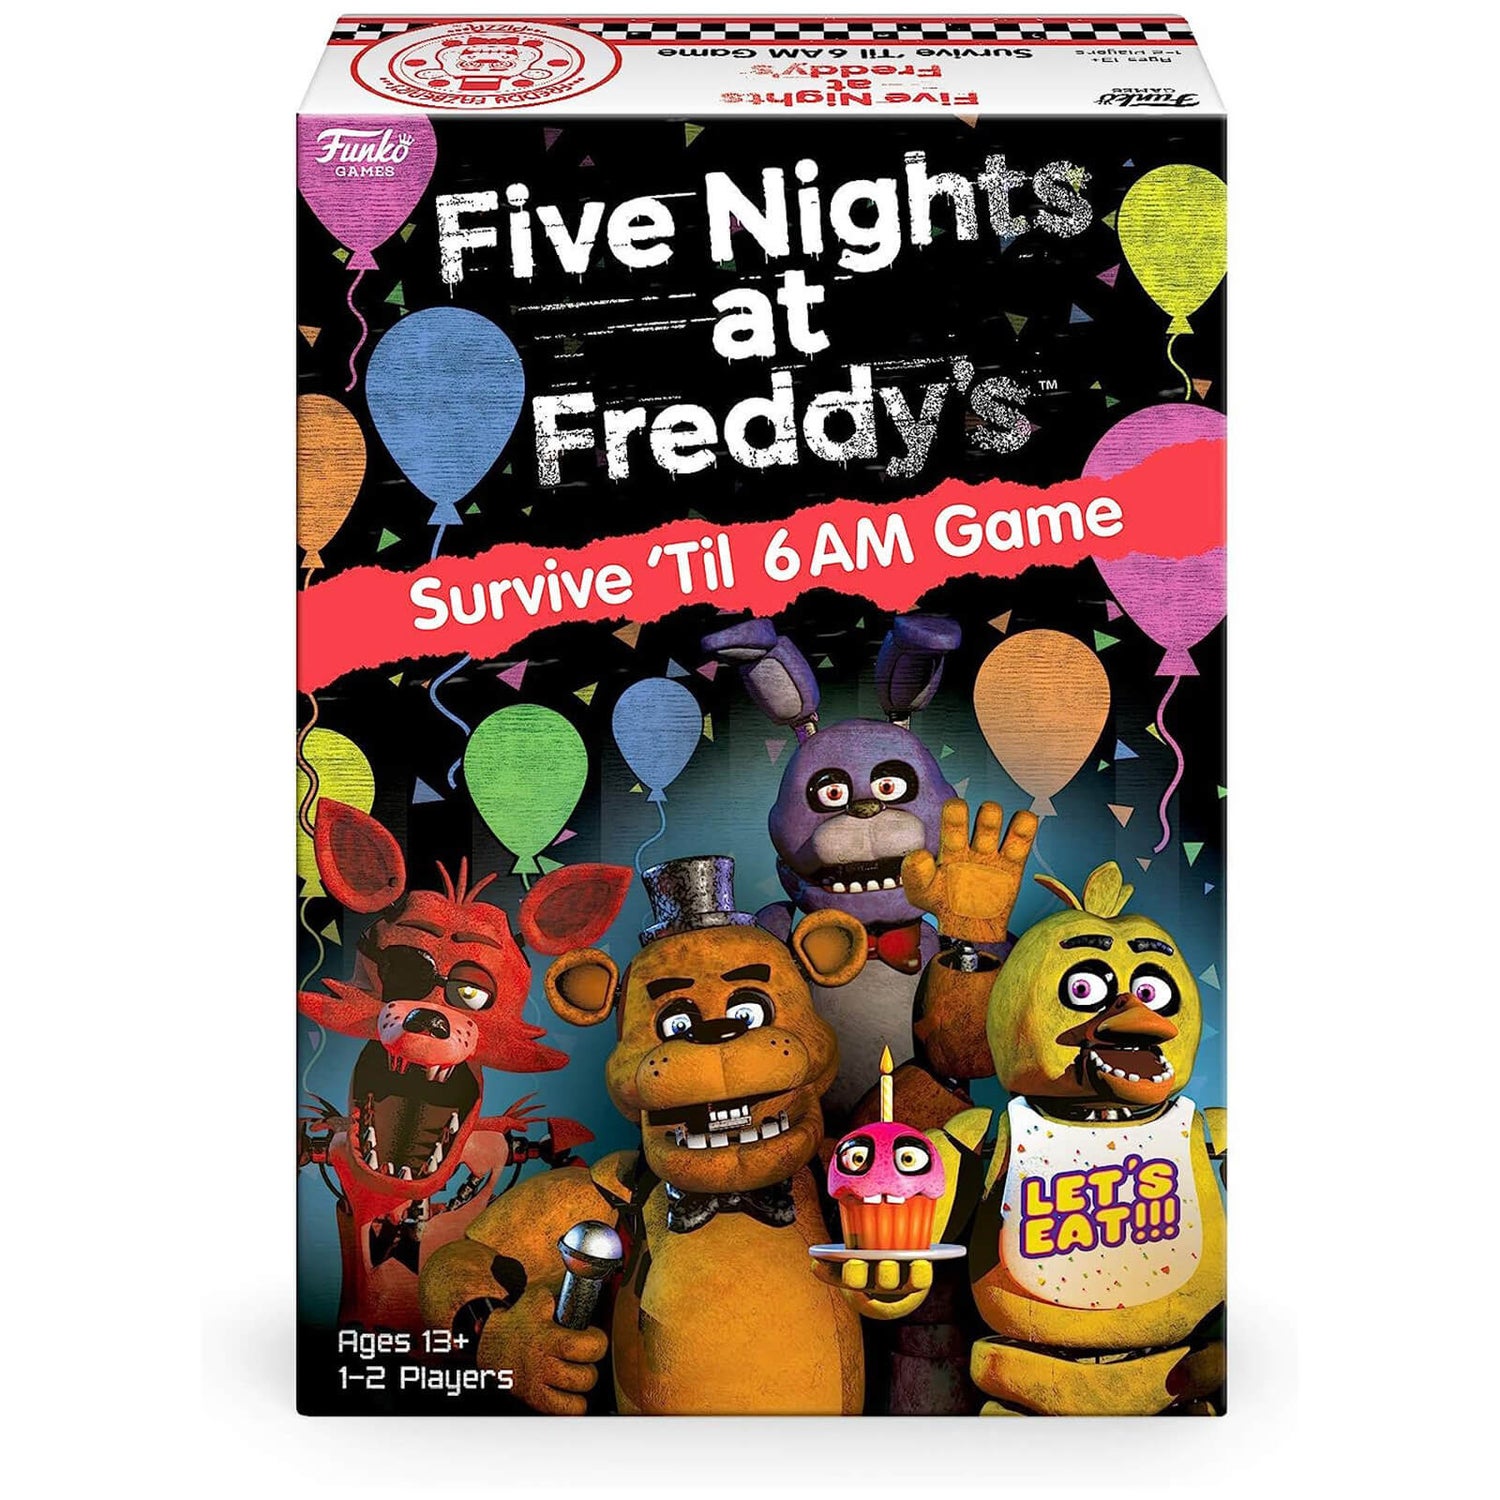 Signature Games: Five Nights at Freddy's Game